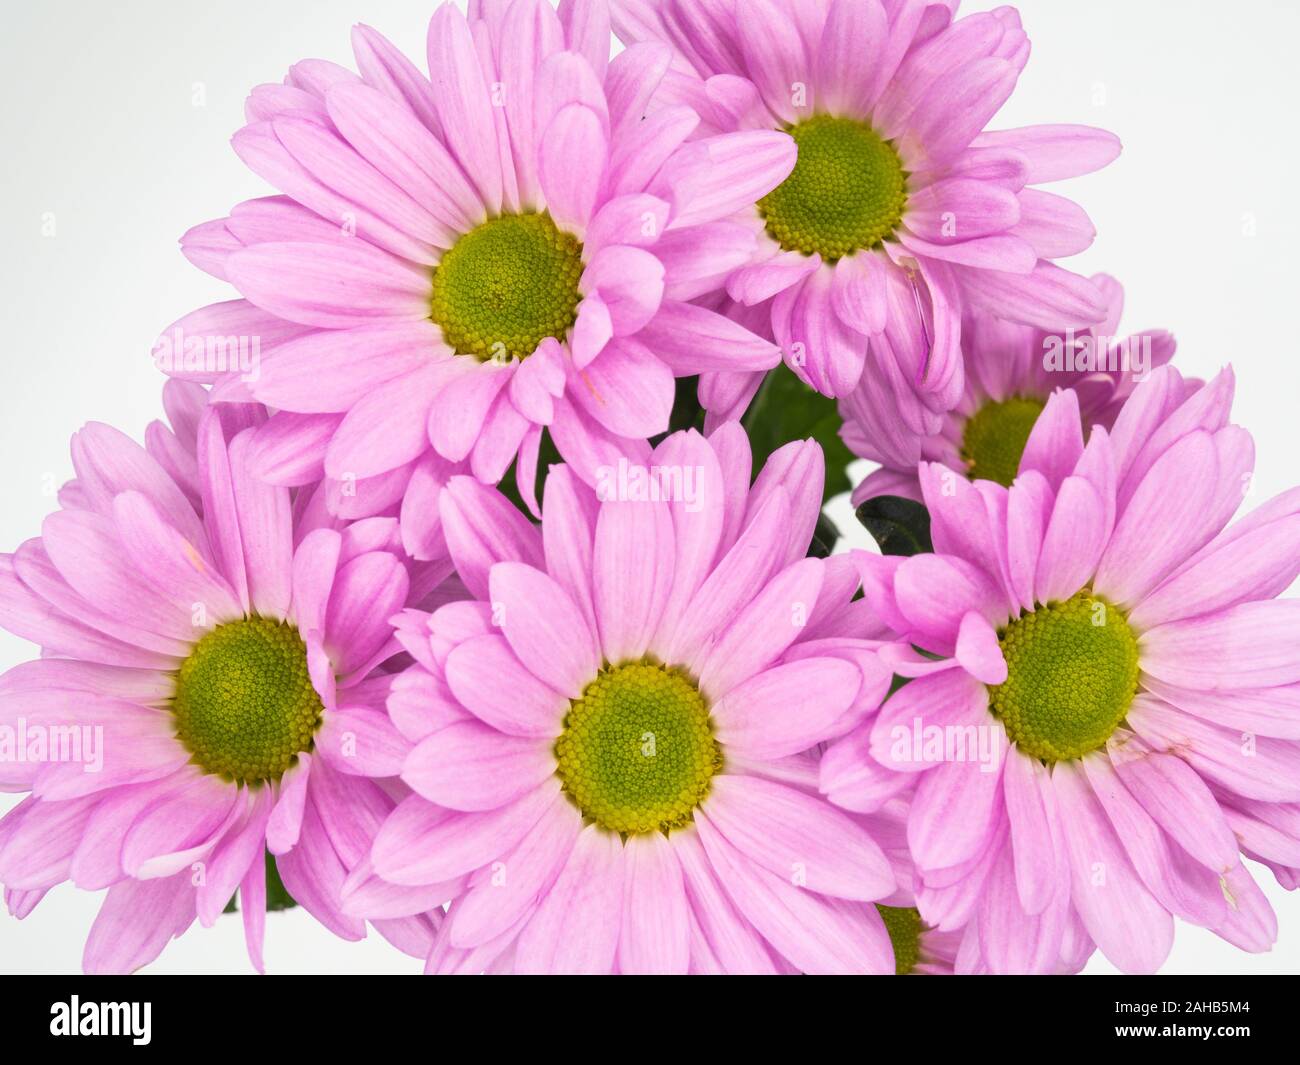 beautiful pink daisies flowers isolated on white background Stock Photo